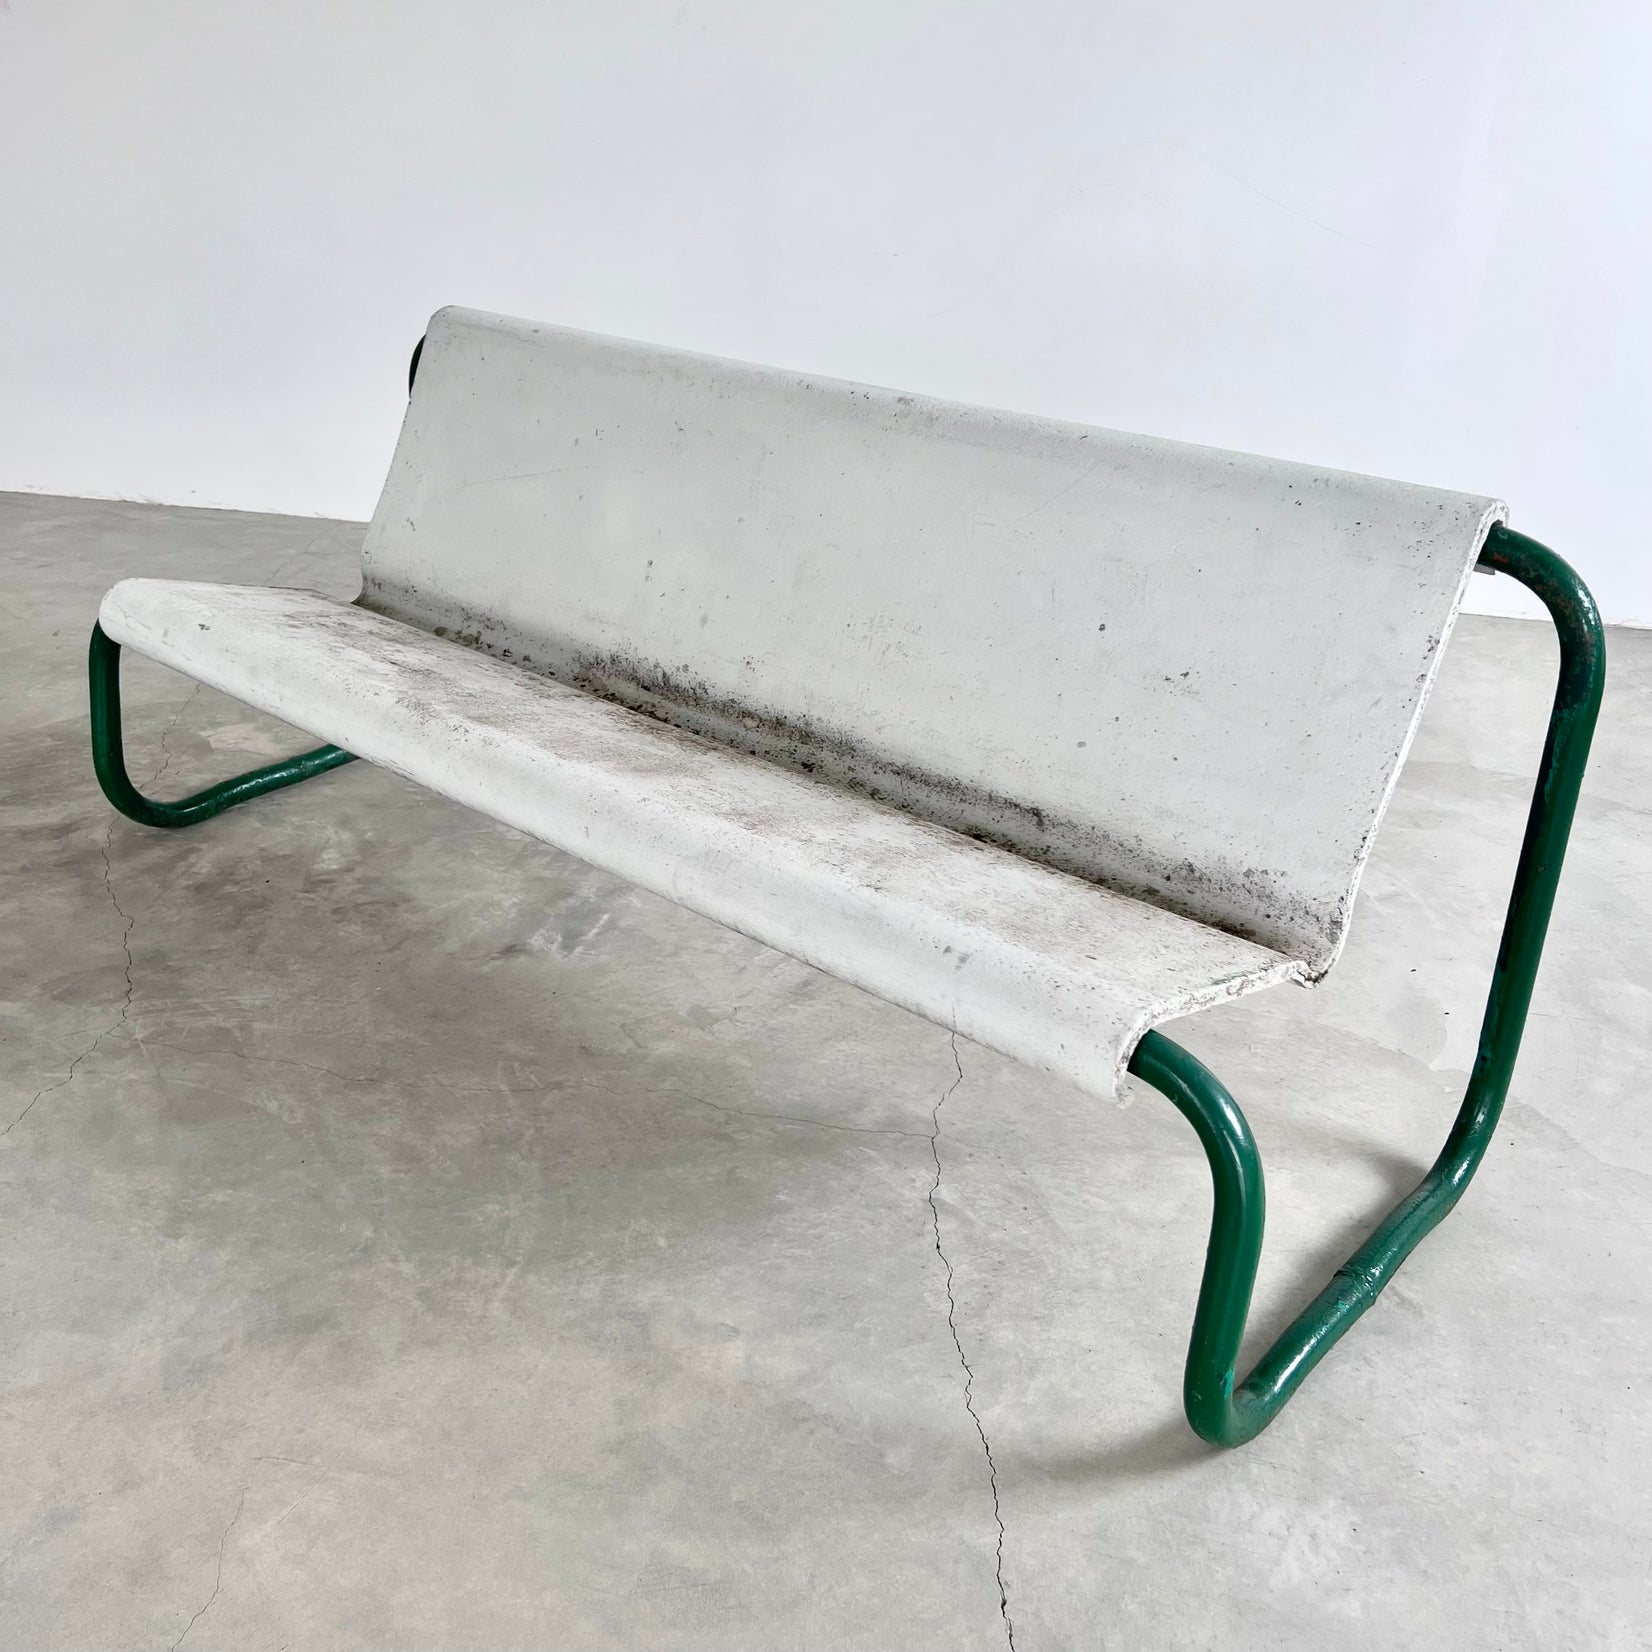 Willy Guhl Concrete and Steel Floating Bench, 1960s Switzerland